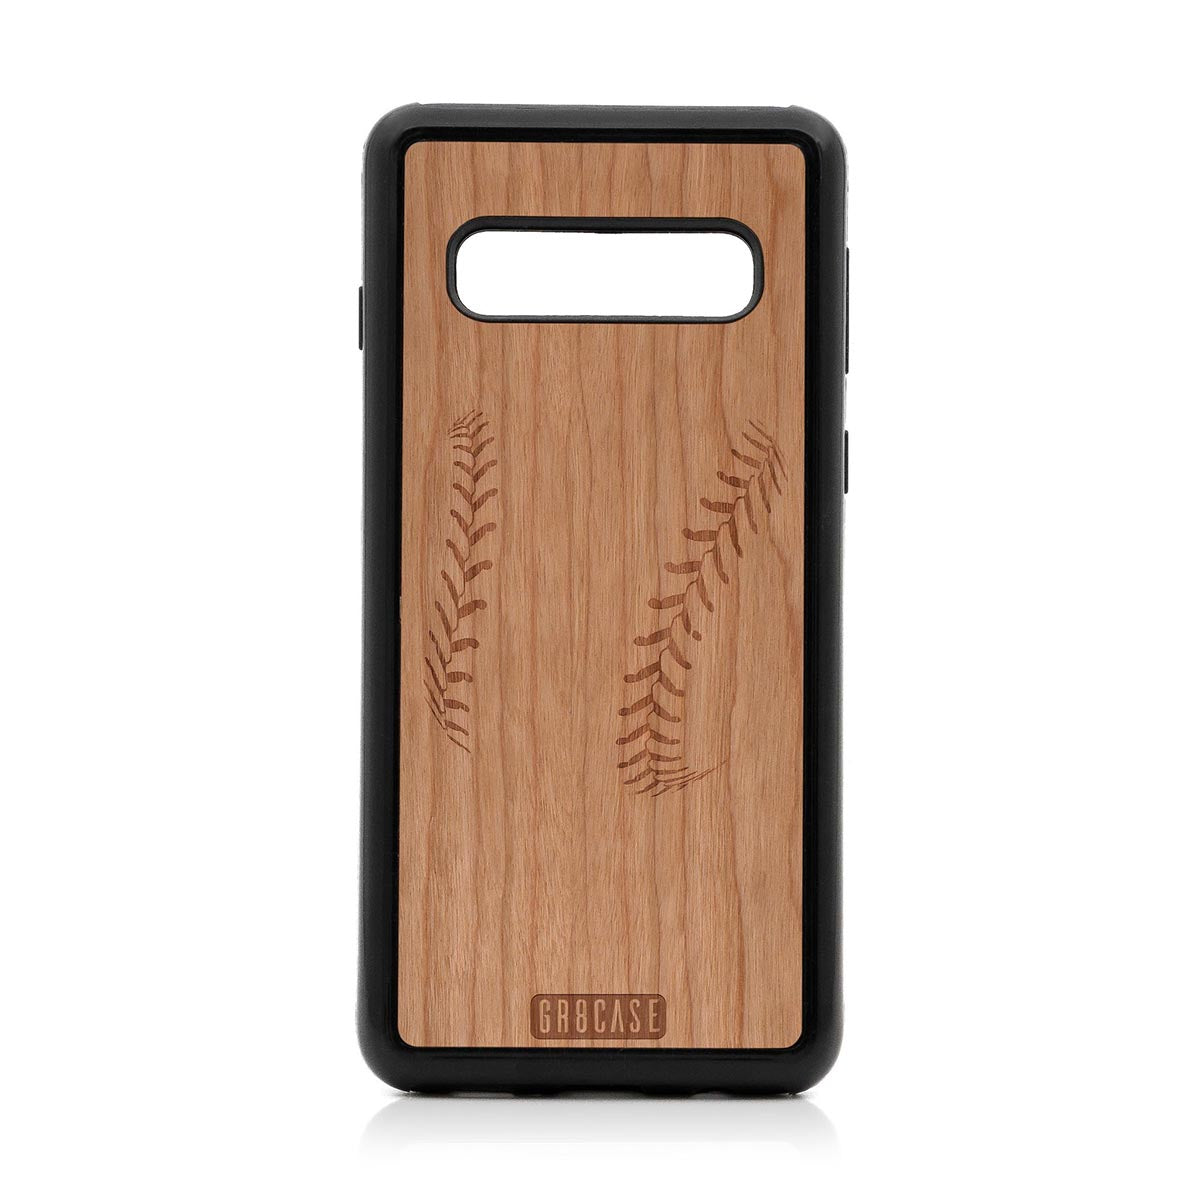 Baseball Stitches Design Wood Case For Samsung Galaxy S10 by GR8CASE